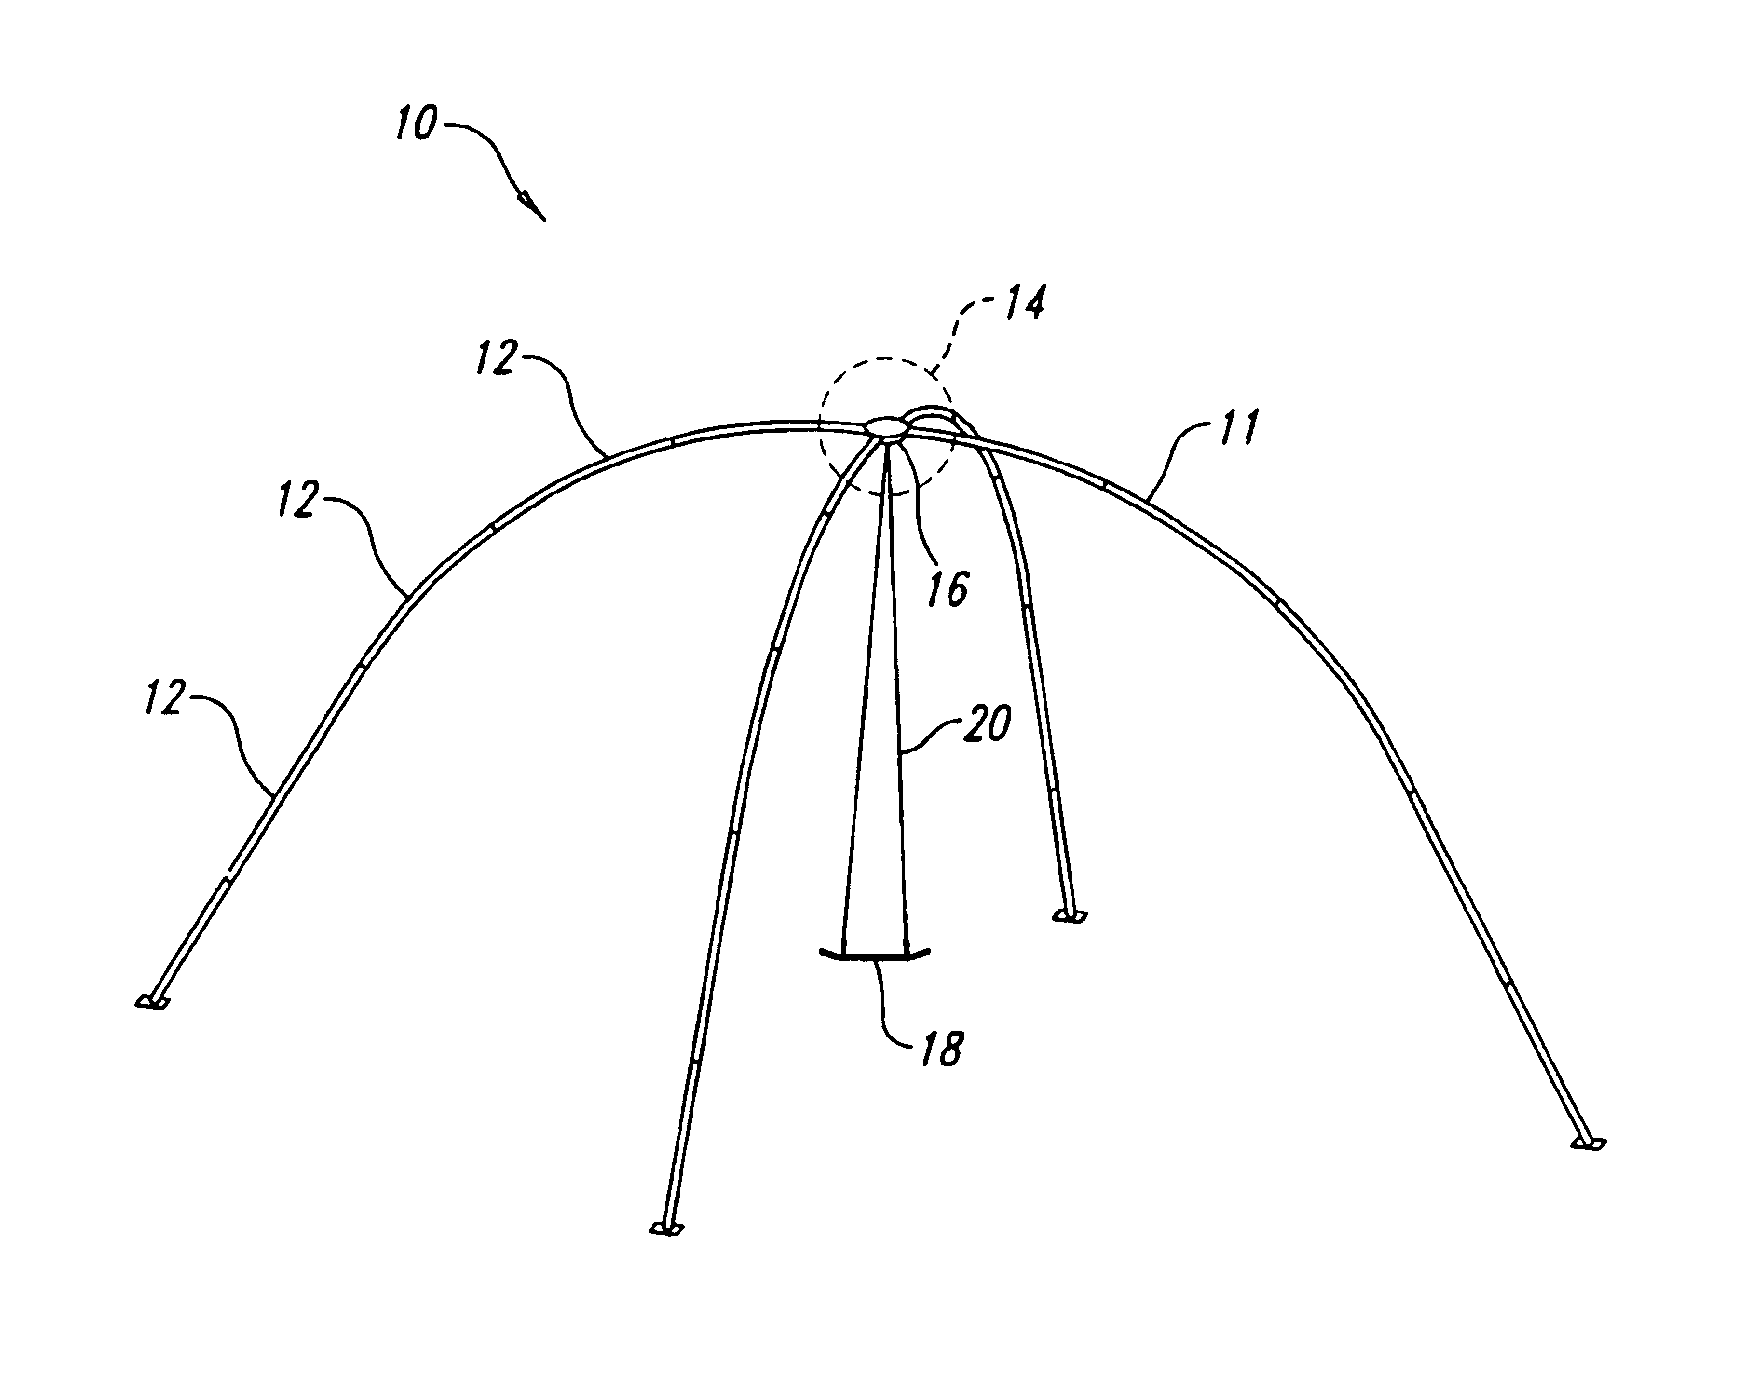 Devices, systems and methods for performing and practicing aerial maneuvers